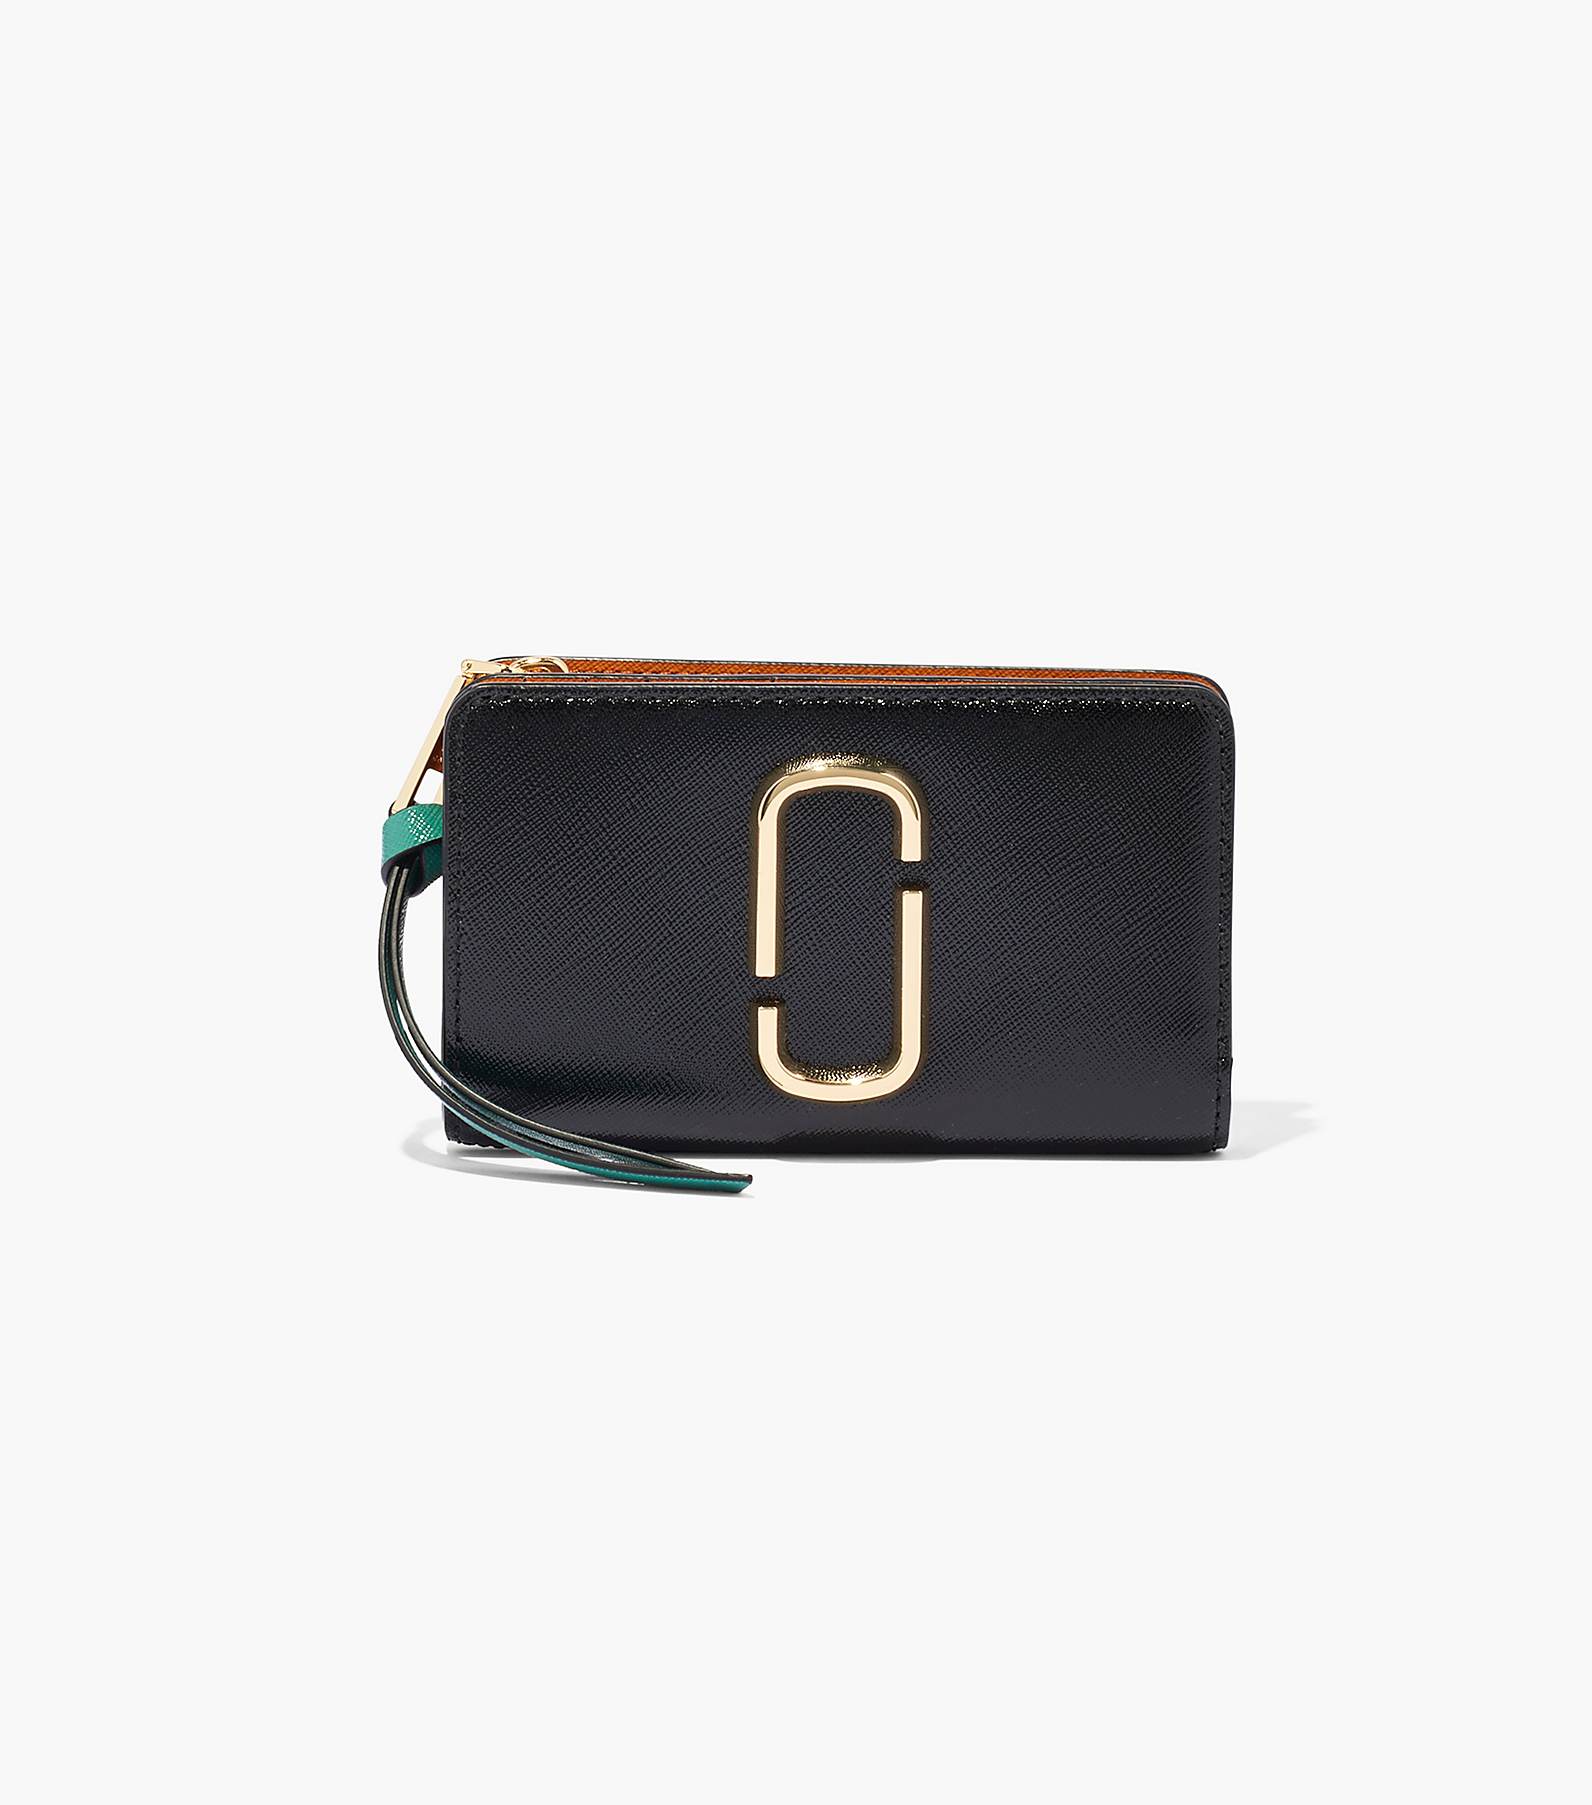 The Snapshot Compact Wallet